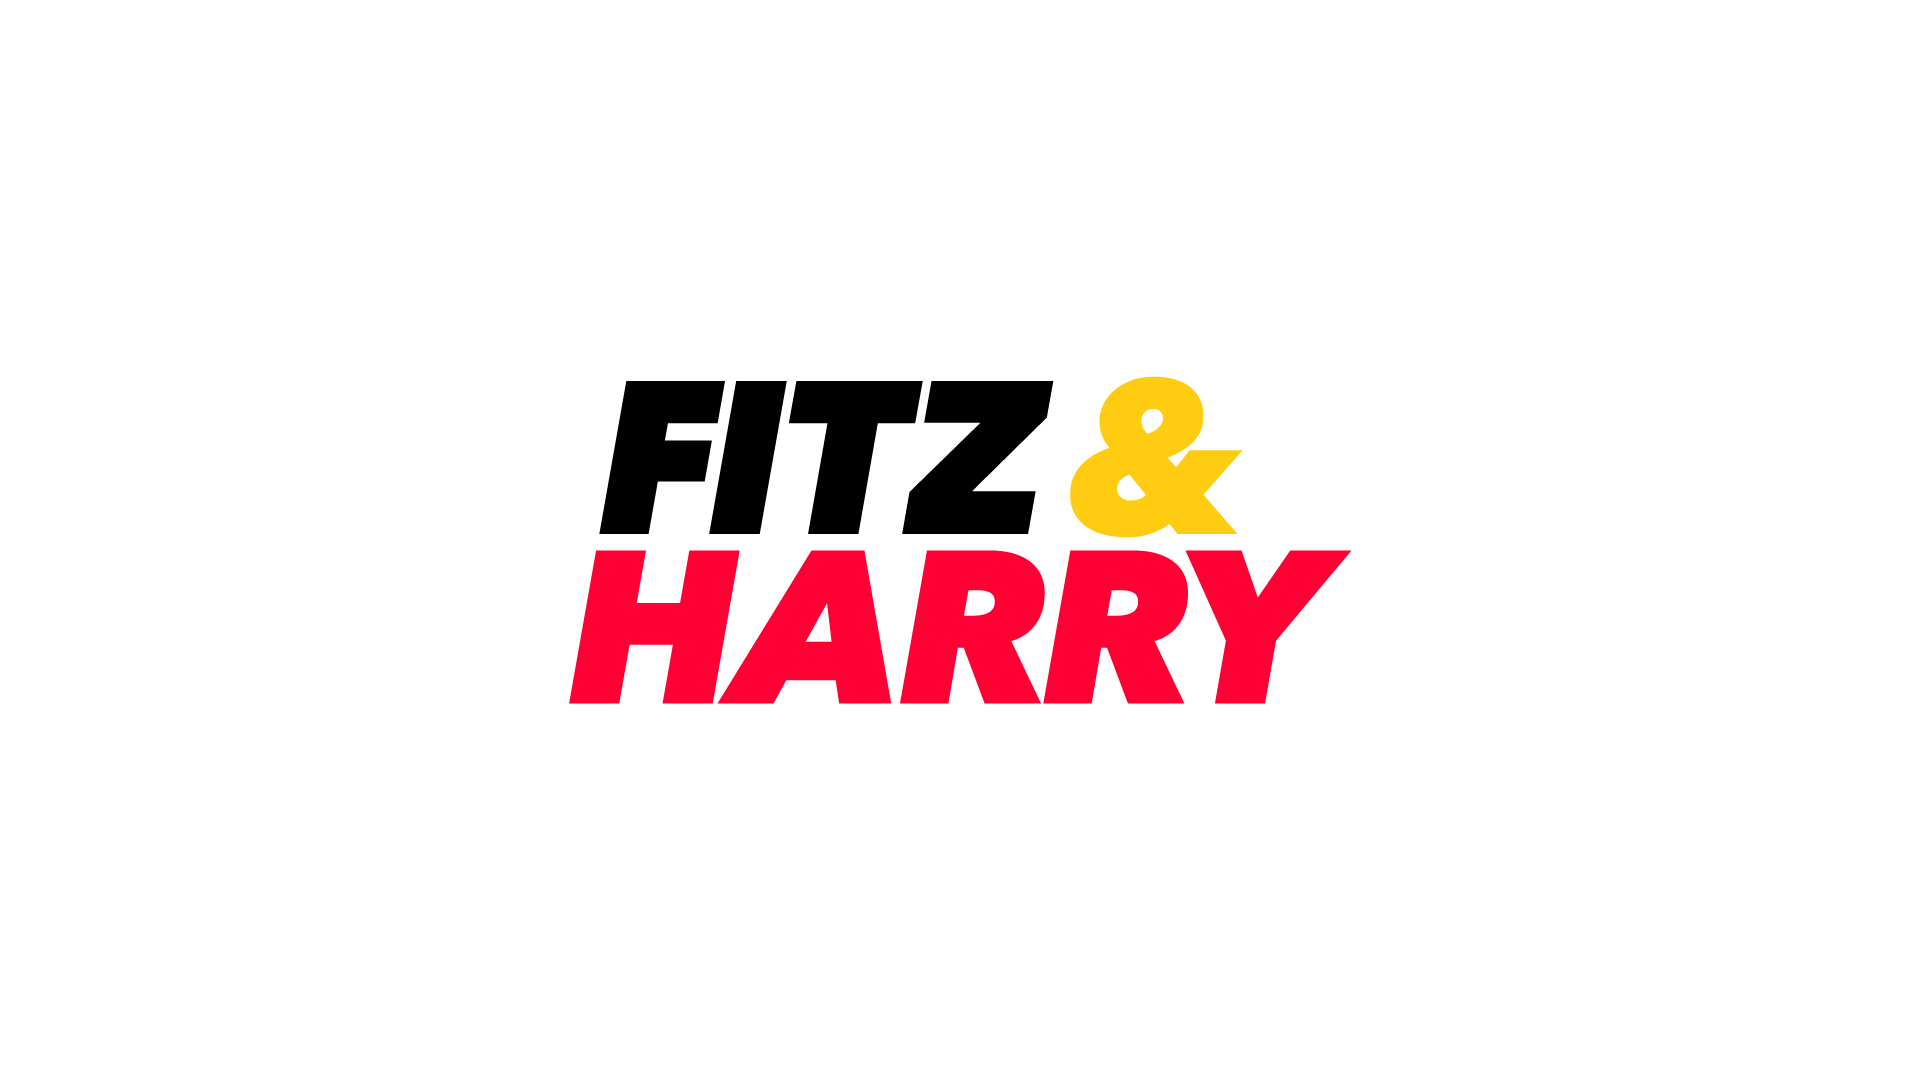 Fitz and Harry logo. License provided by ESPN to 1027 ESPN Austin.